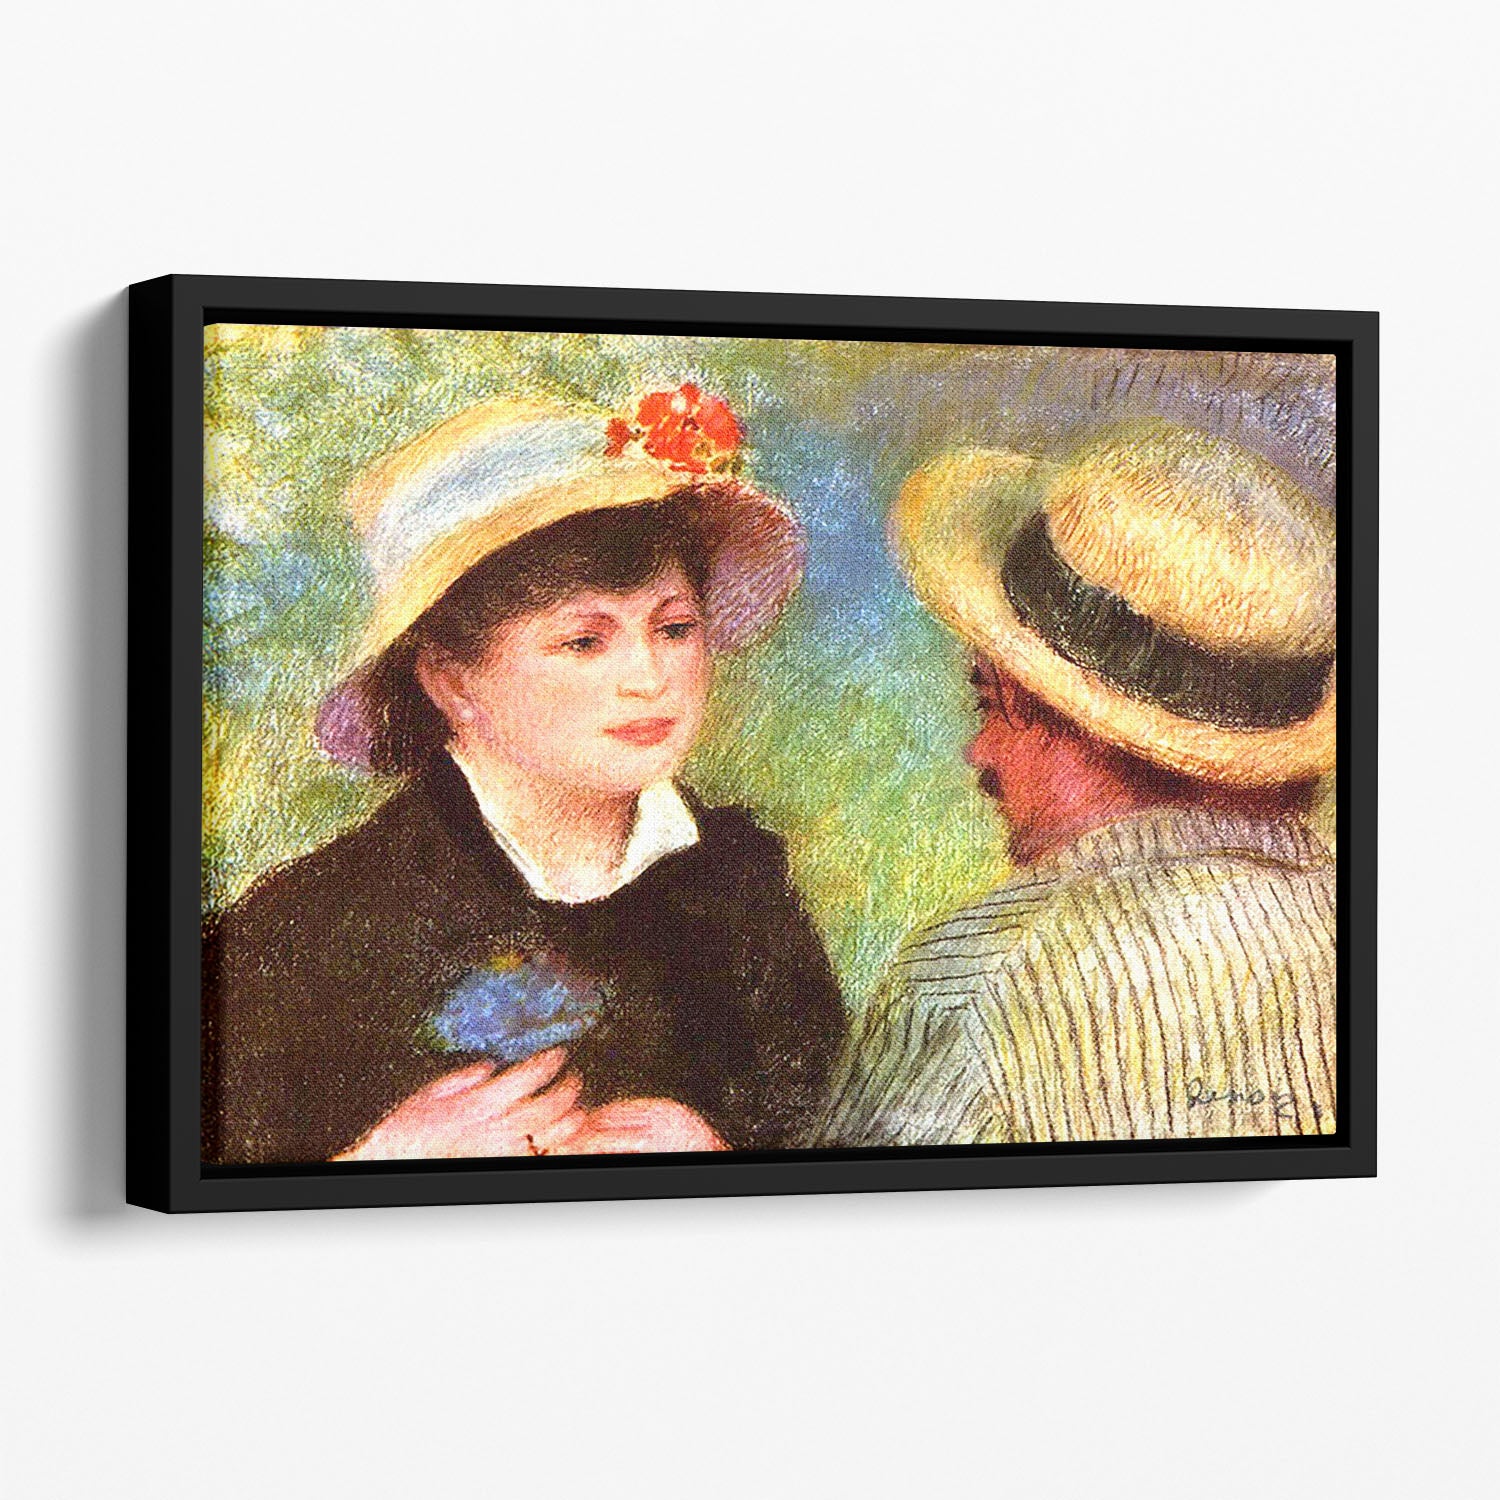 Les Canotiers by Renoir Floating Framed Canvas